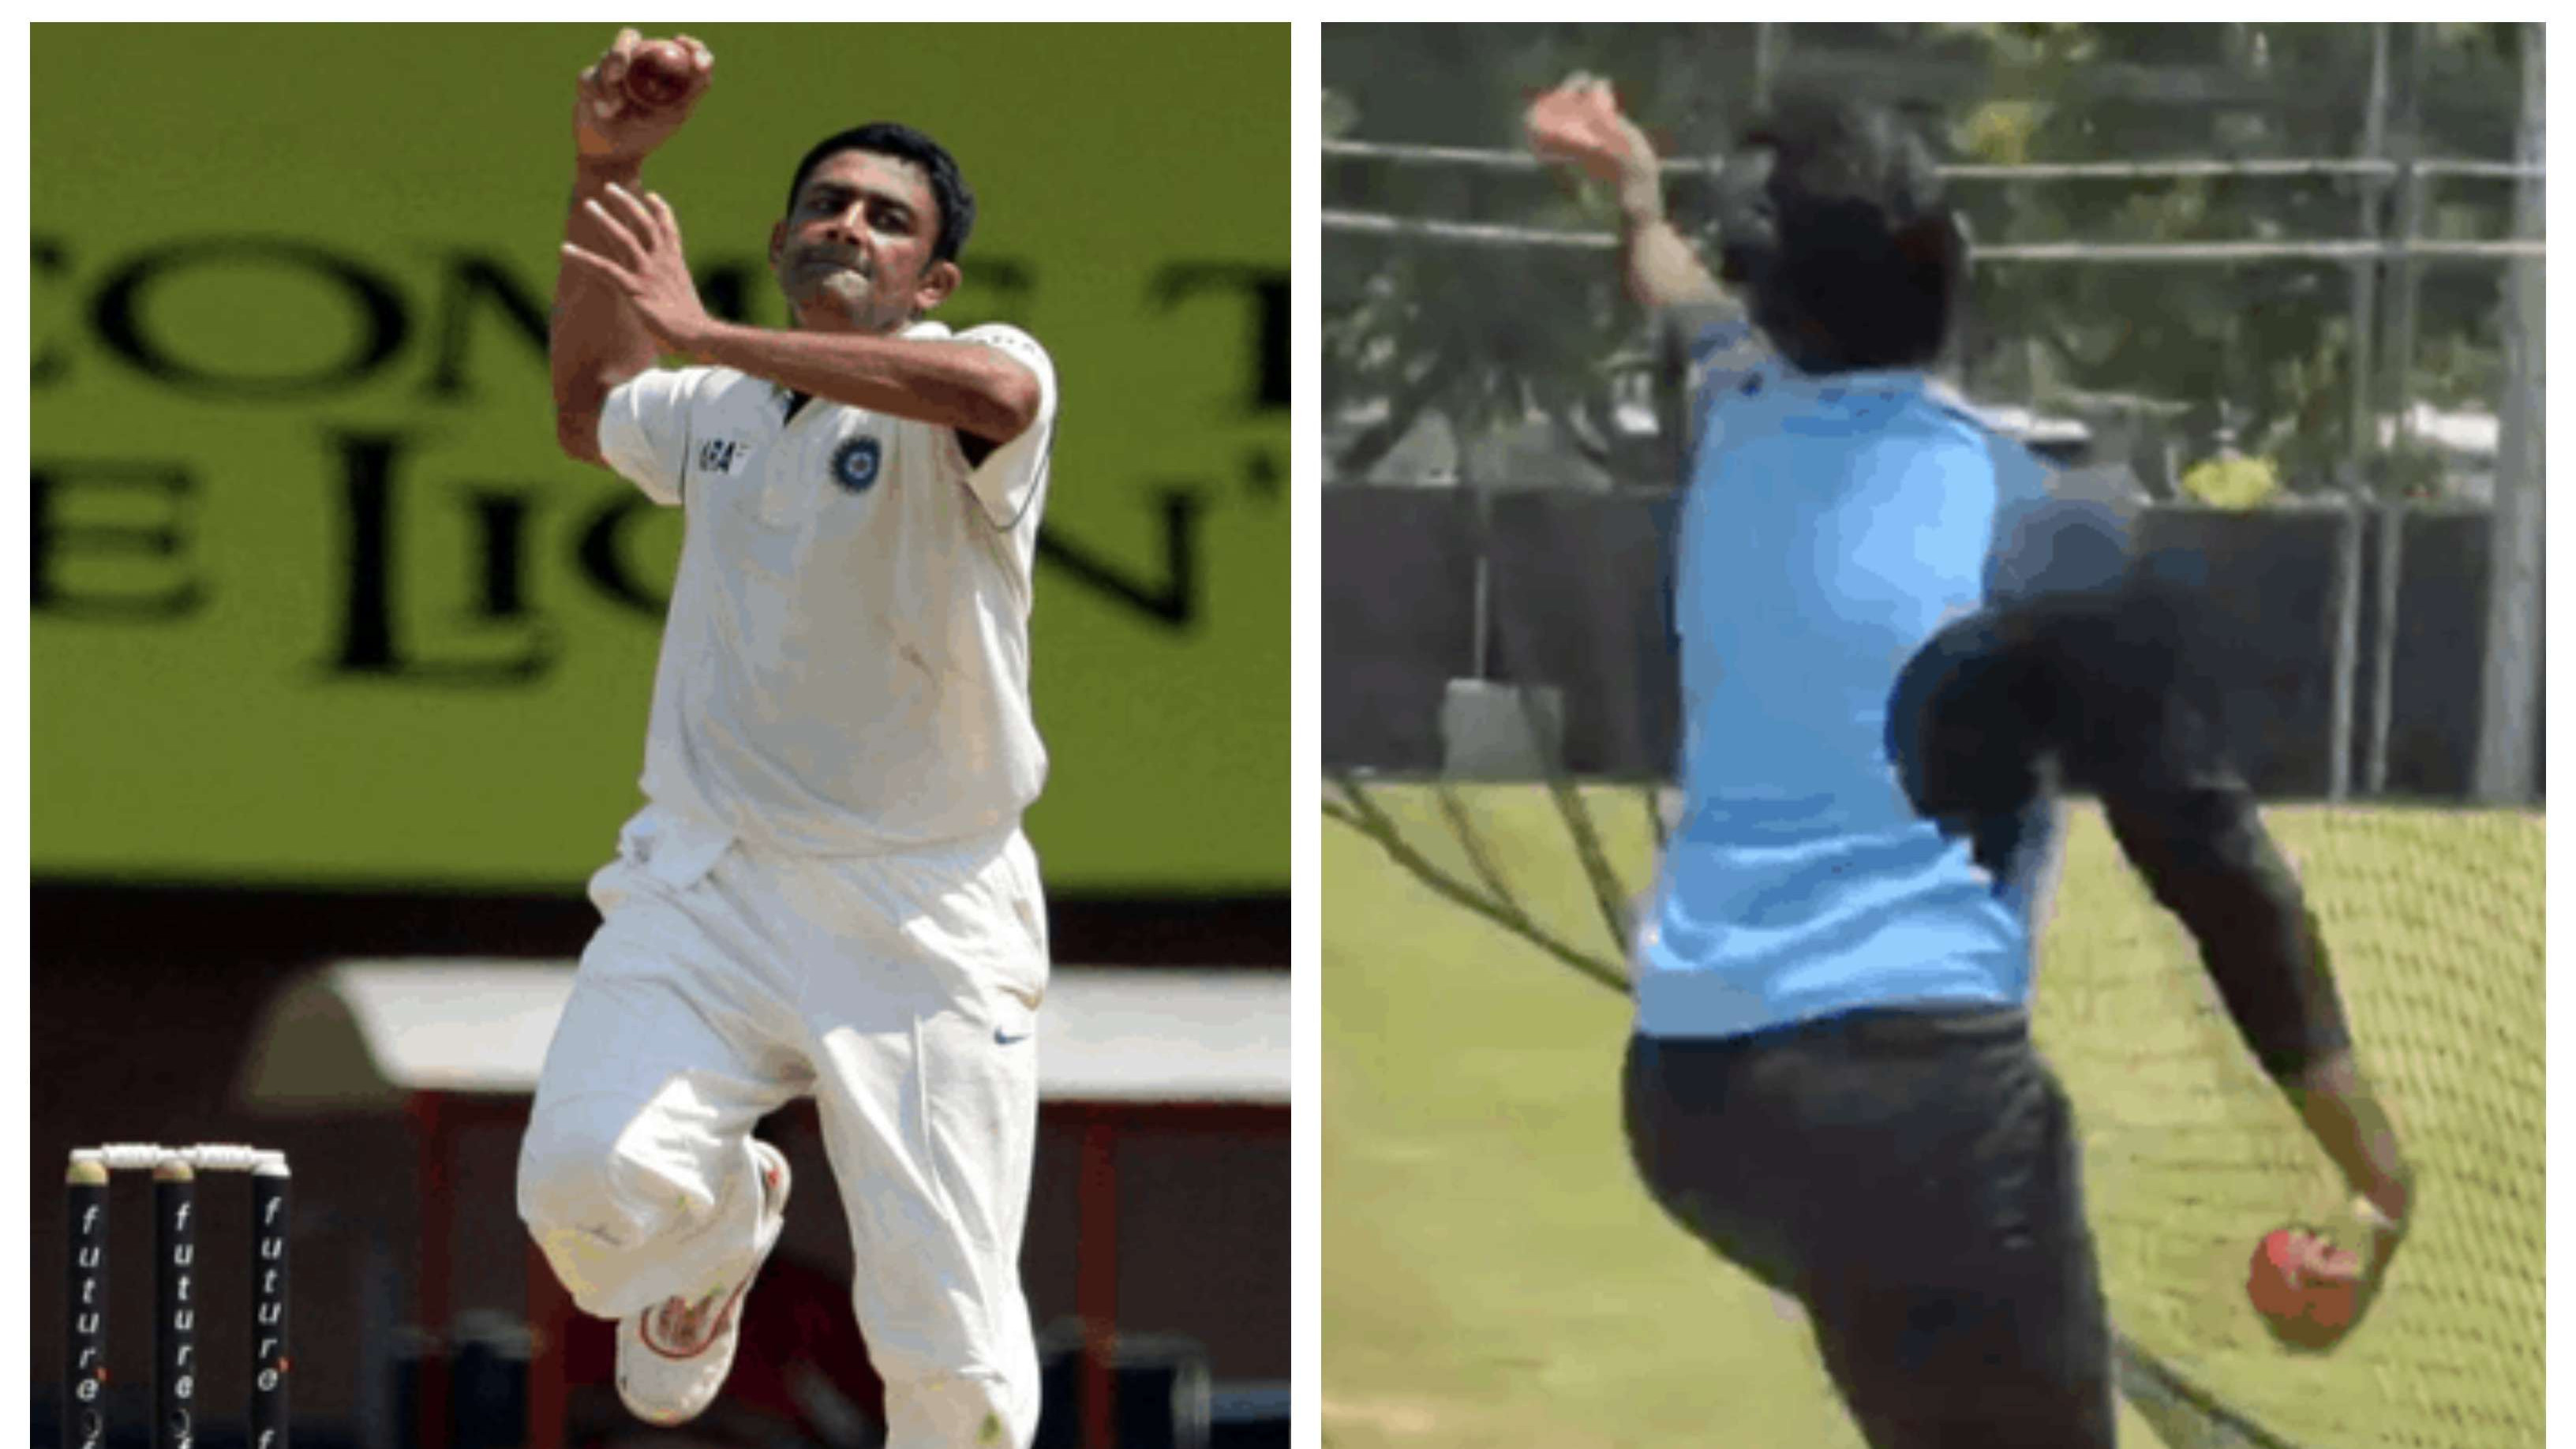 WATCH – Jasprit Bumrah imitates Anil Kumble’s bowling action in nets, spin legend reacts